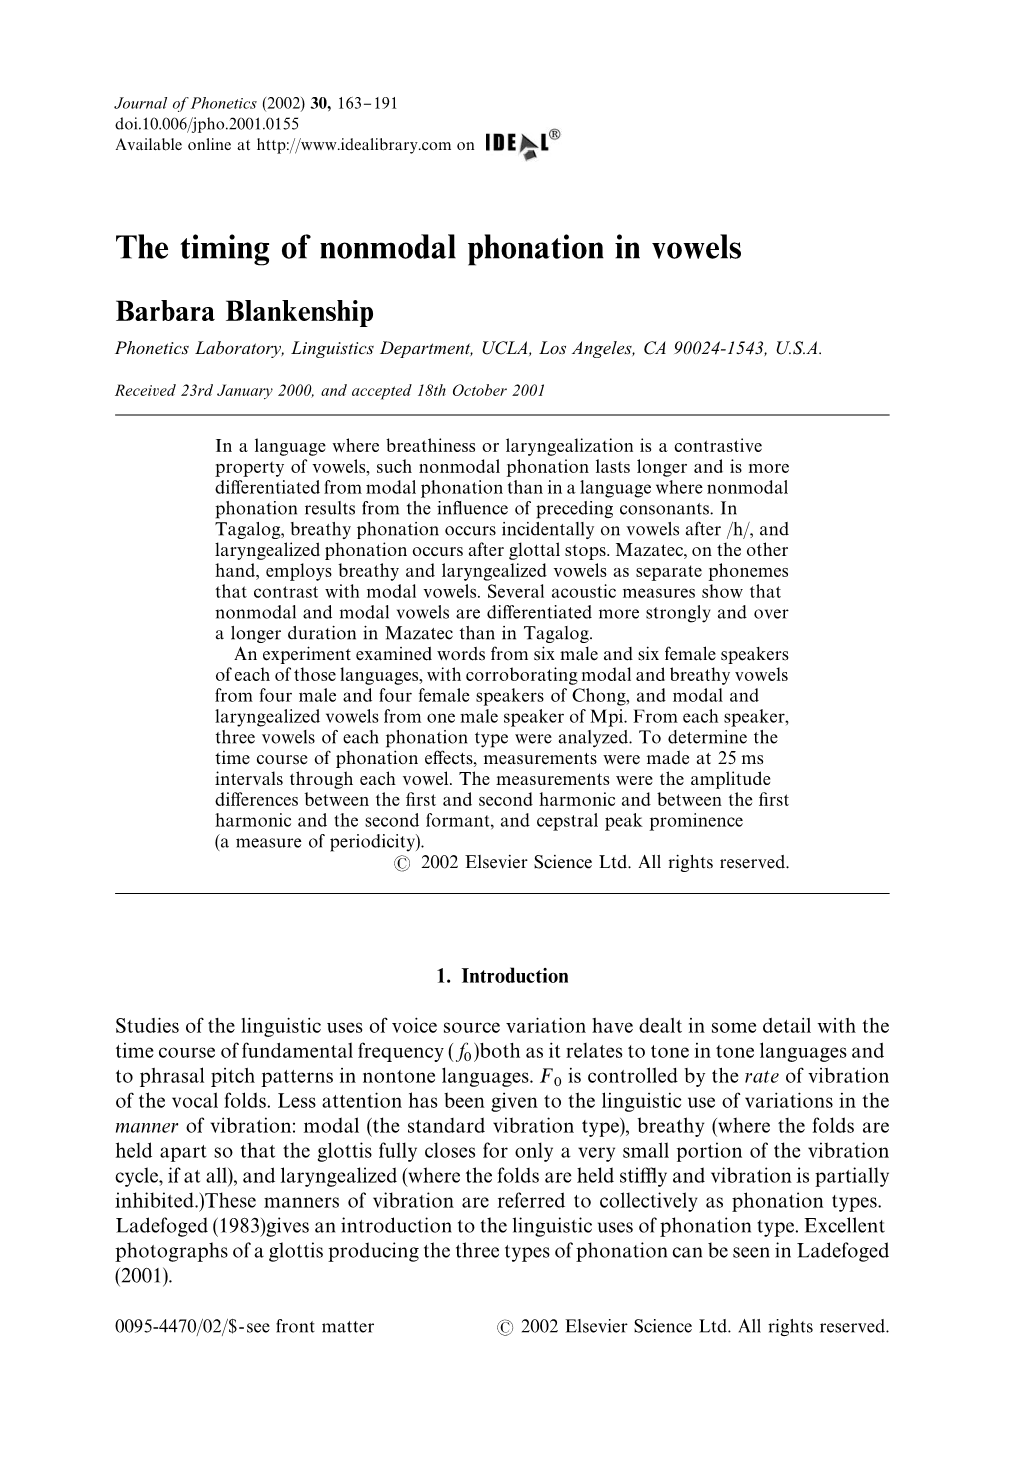 The Timing of Nonmodal Phonation in Vowels